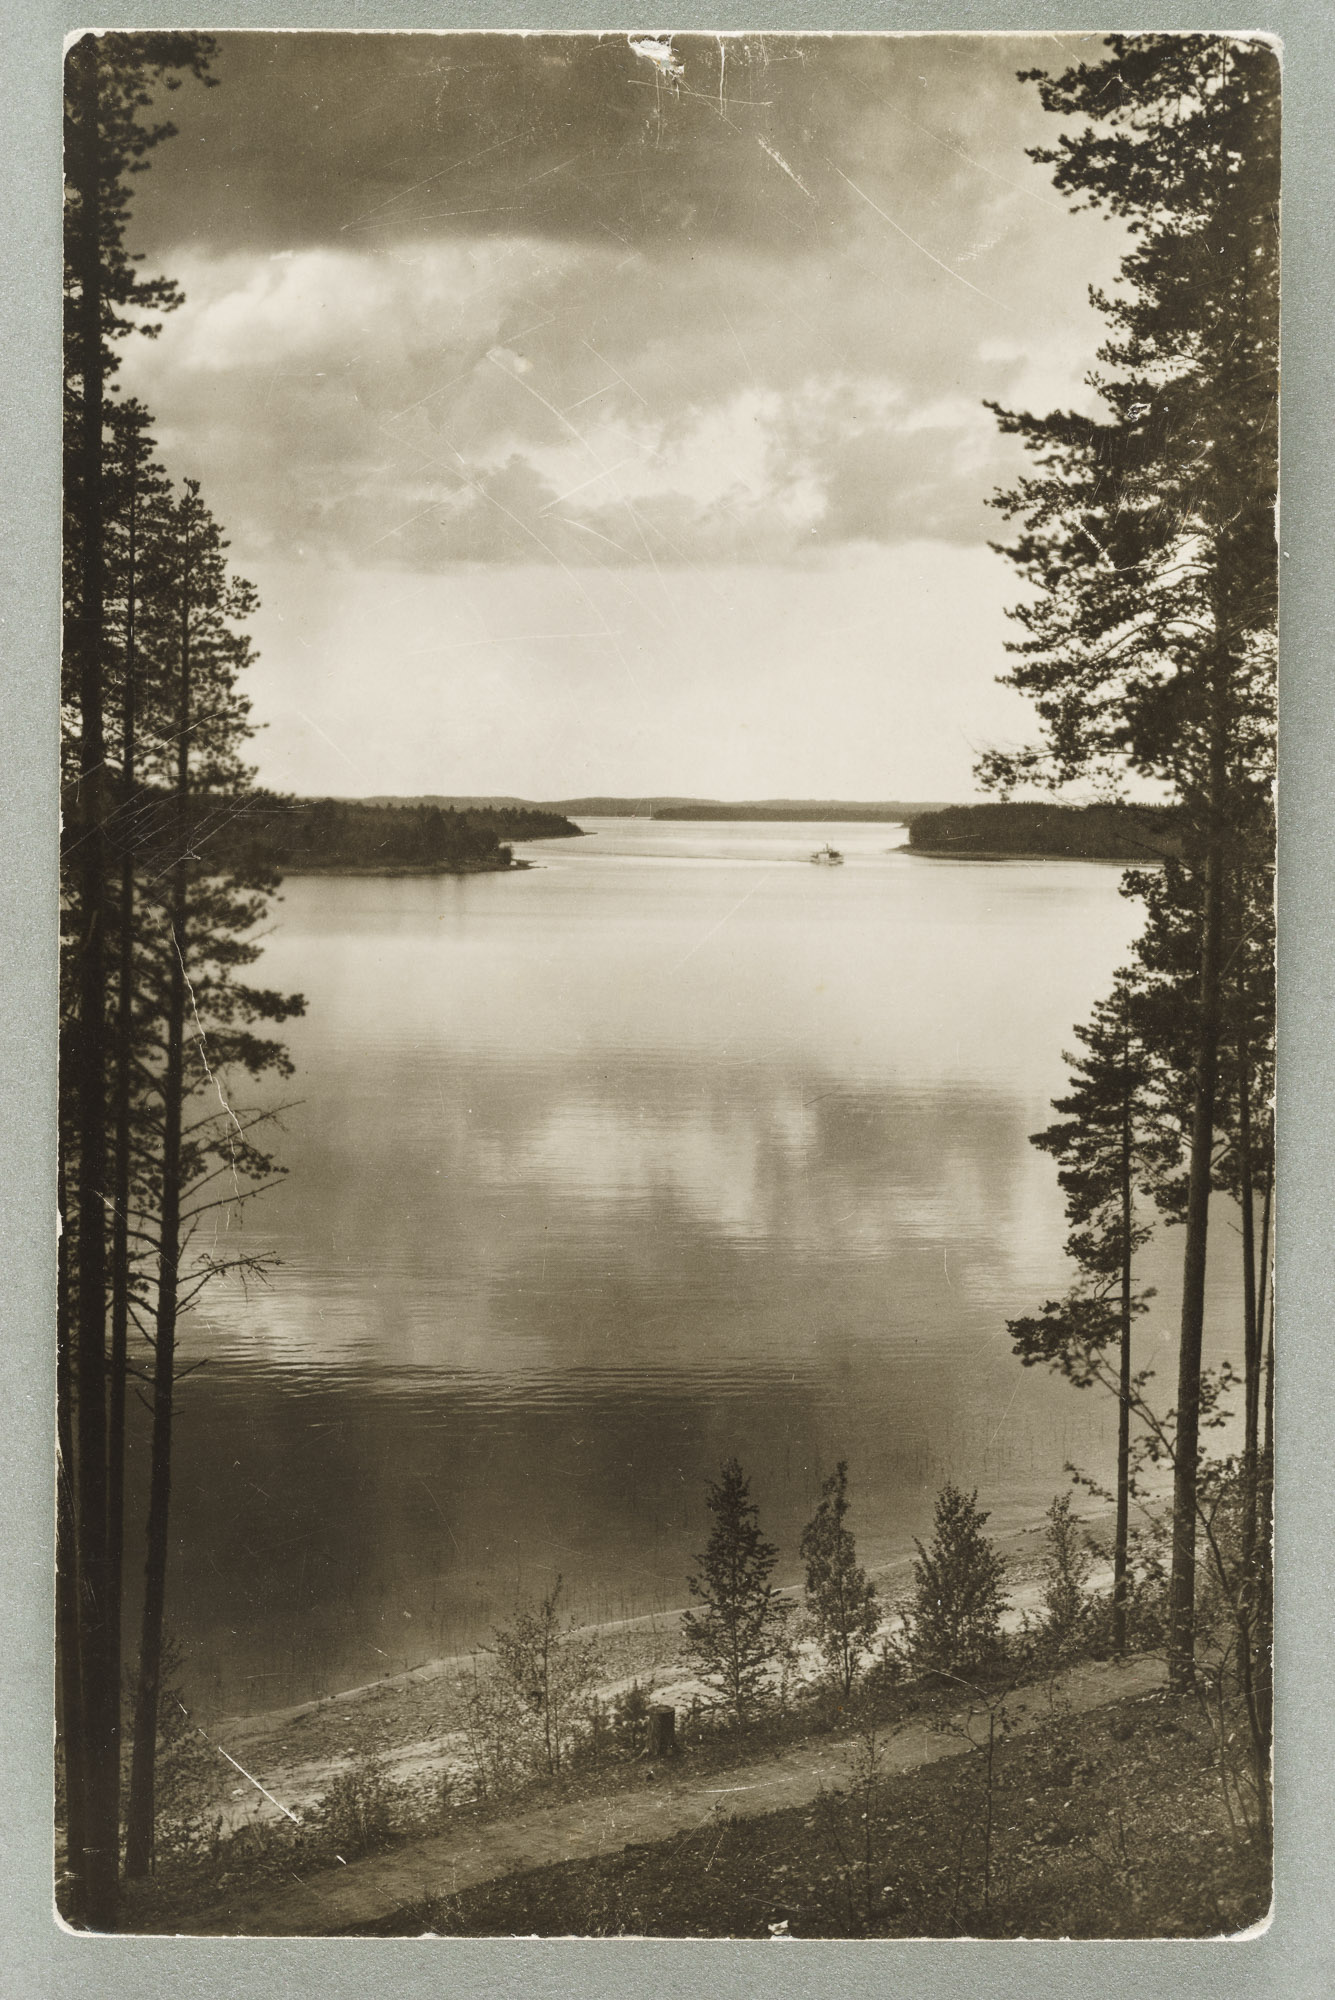 From Takaharju to the verse between Vaahersalo and the Tuunaansaare, the verse of the steam-boat arrives at the Punkaharju